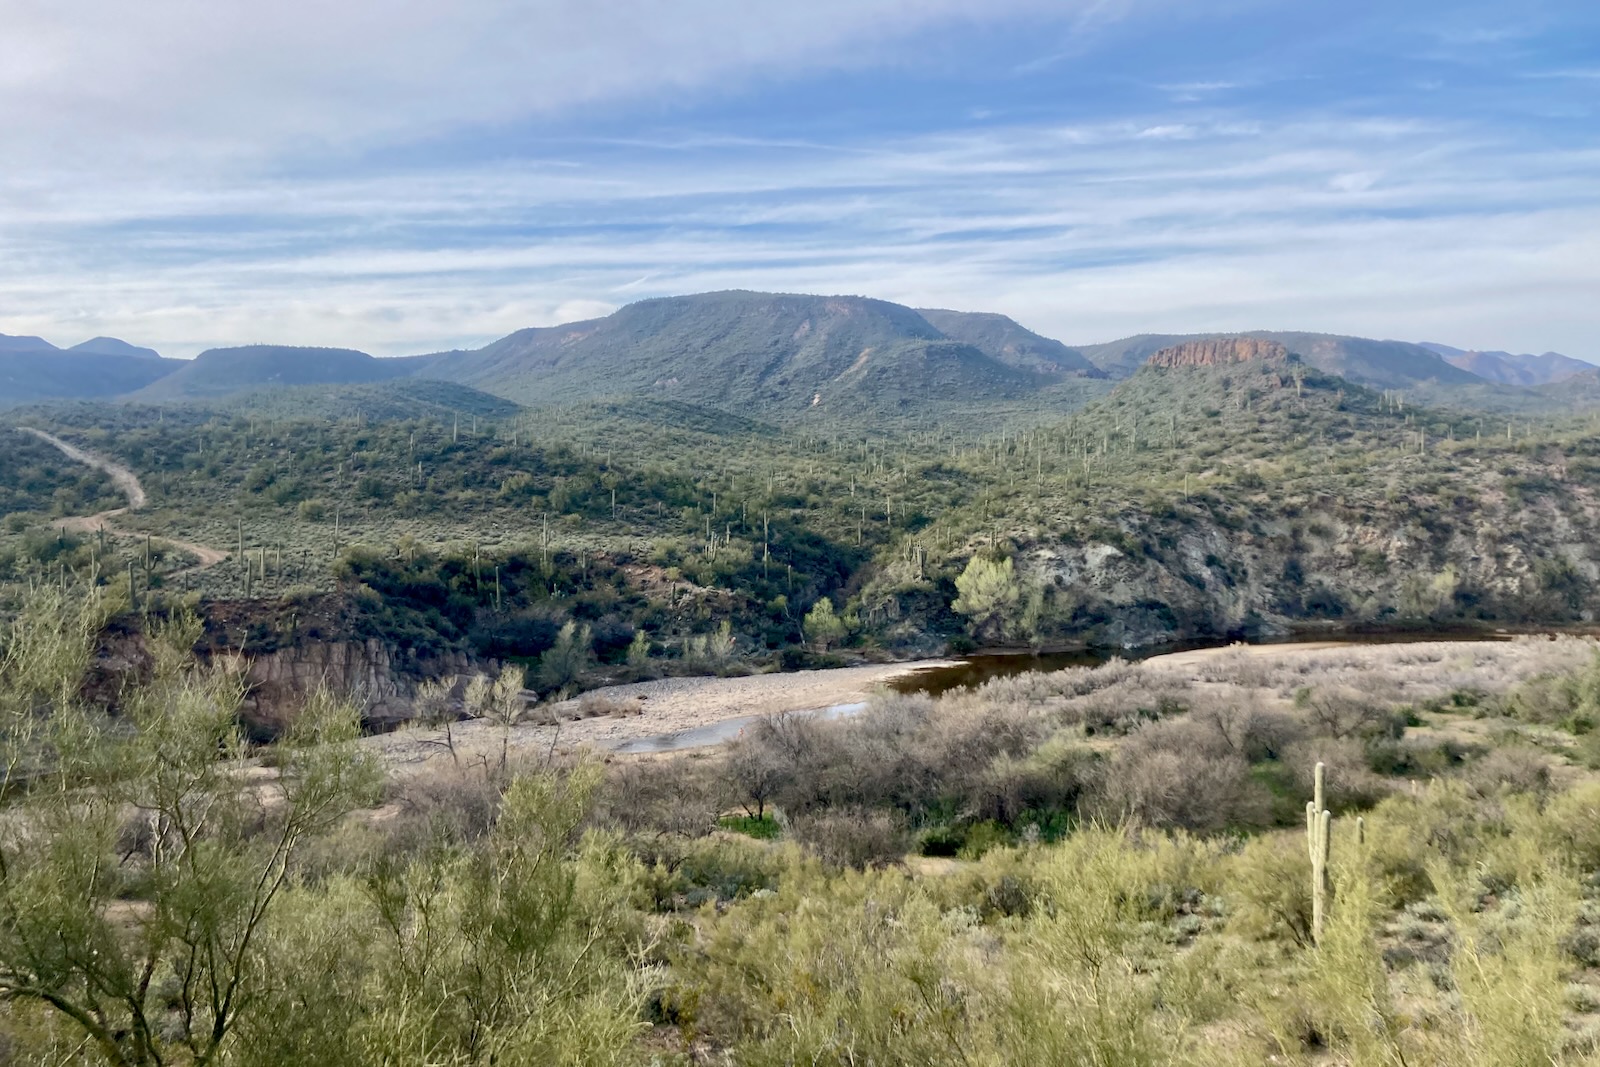 Looking back at the Agua Fria River